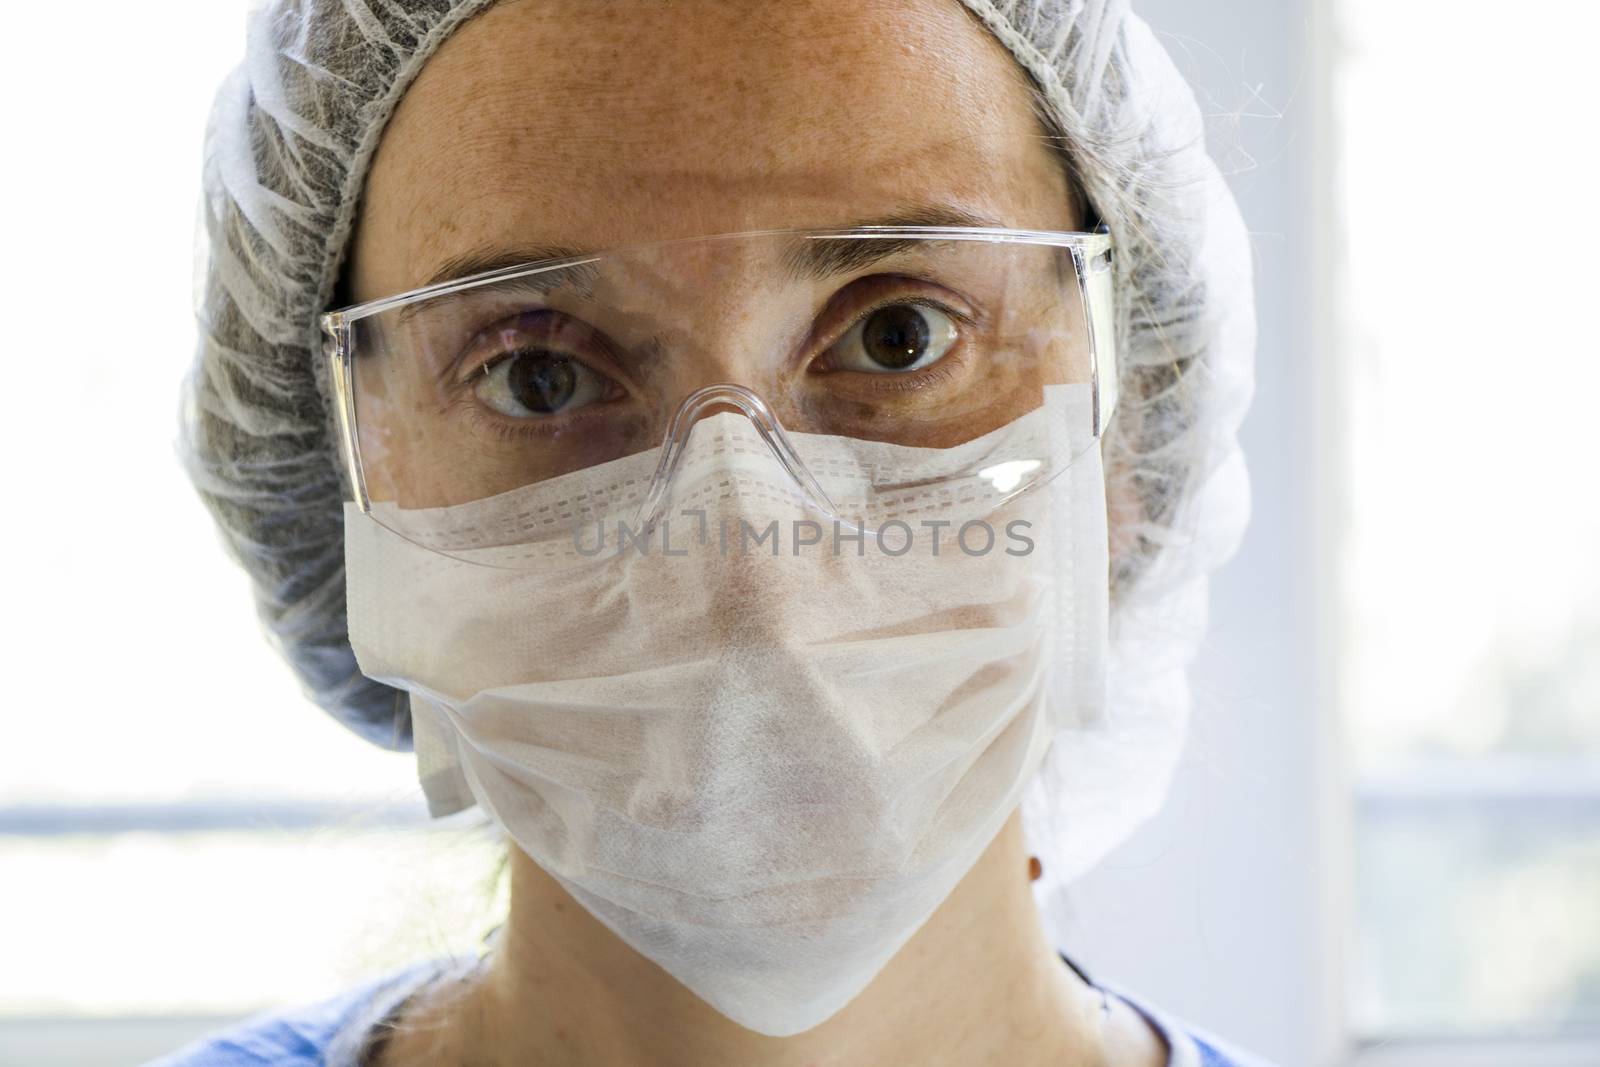 Woman doctors portrait, young girl doctors face with mask and safety glass uniform. Uniform for surgery and viruses. close-up.